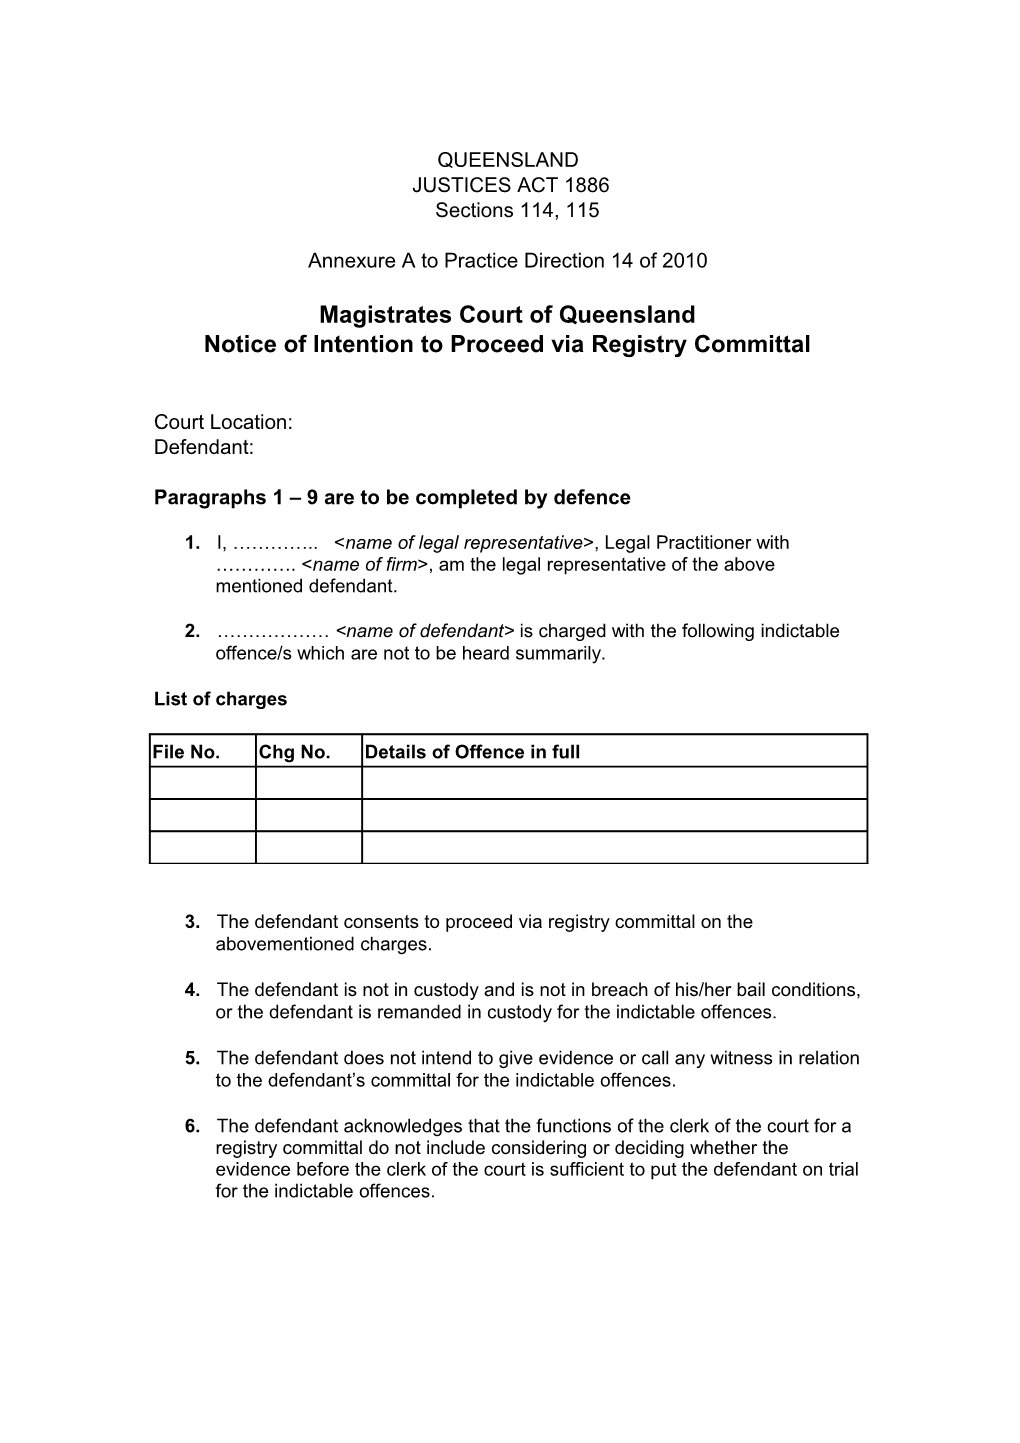 Notice of Intention to Proceed Via Registry Committal